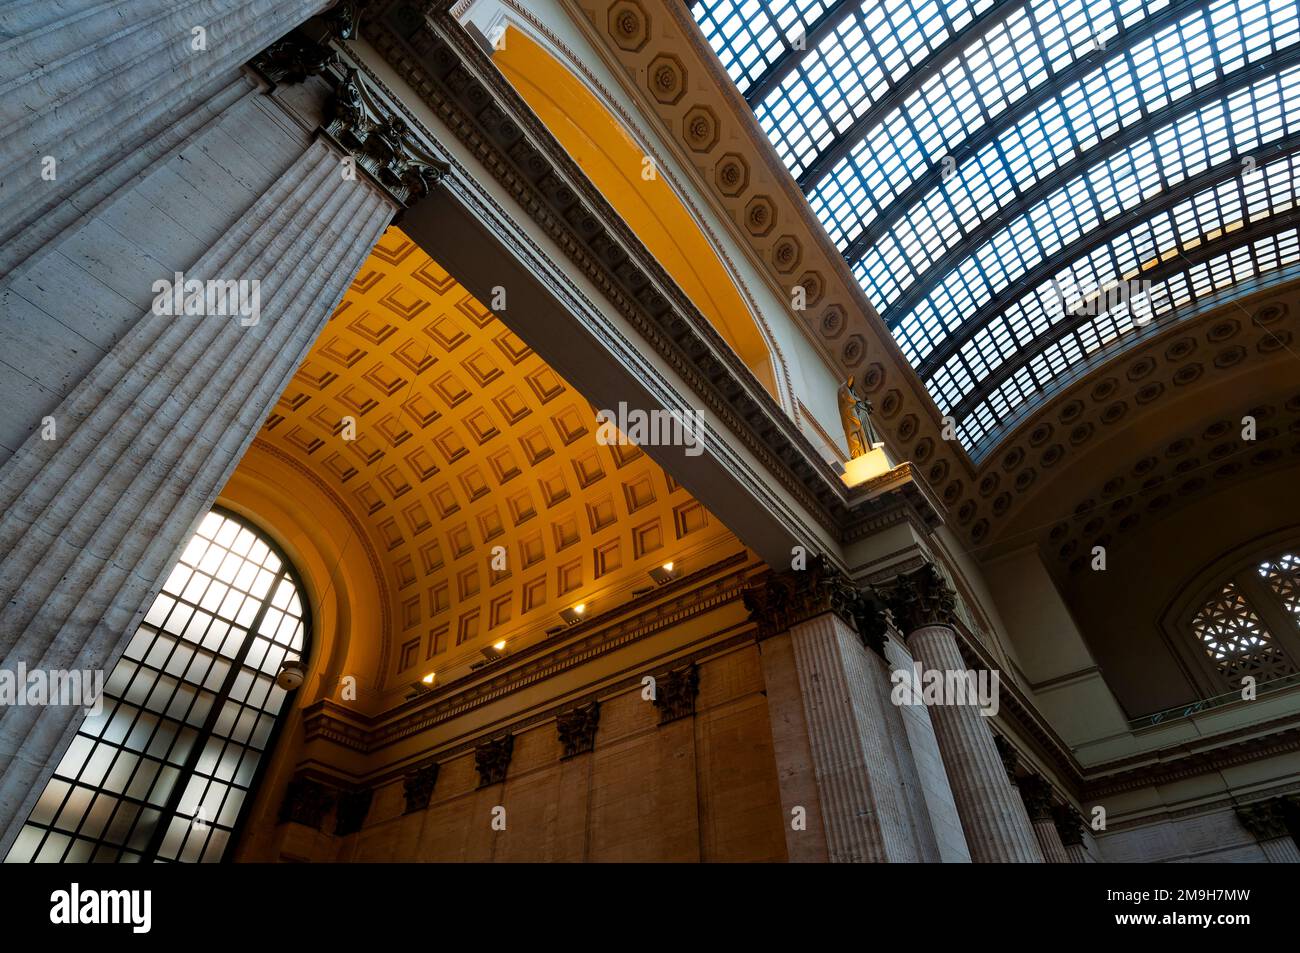 Ceiling of Great Hall, Union Station, Chicago, Illinois, USA Stock Photo